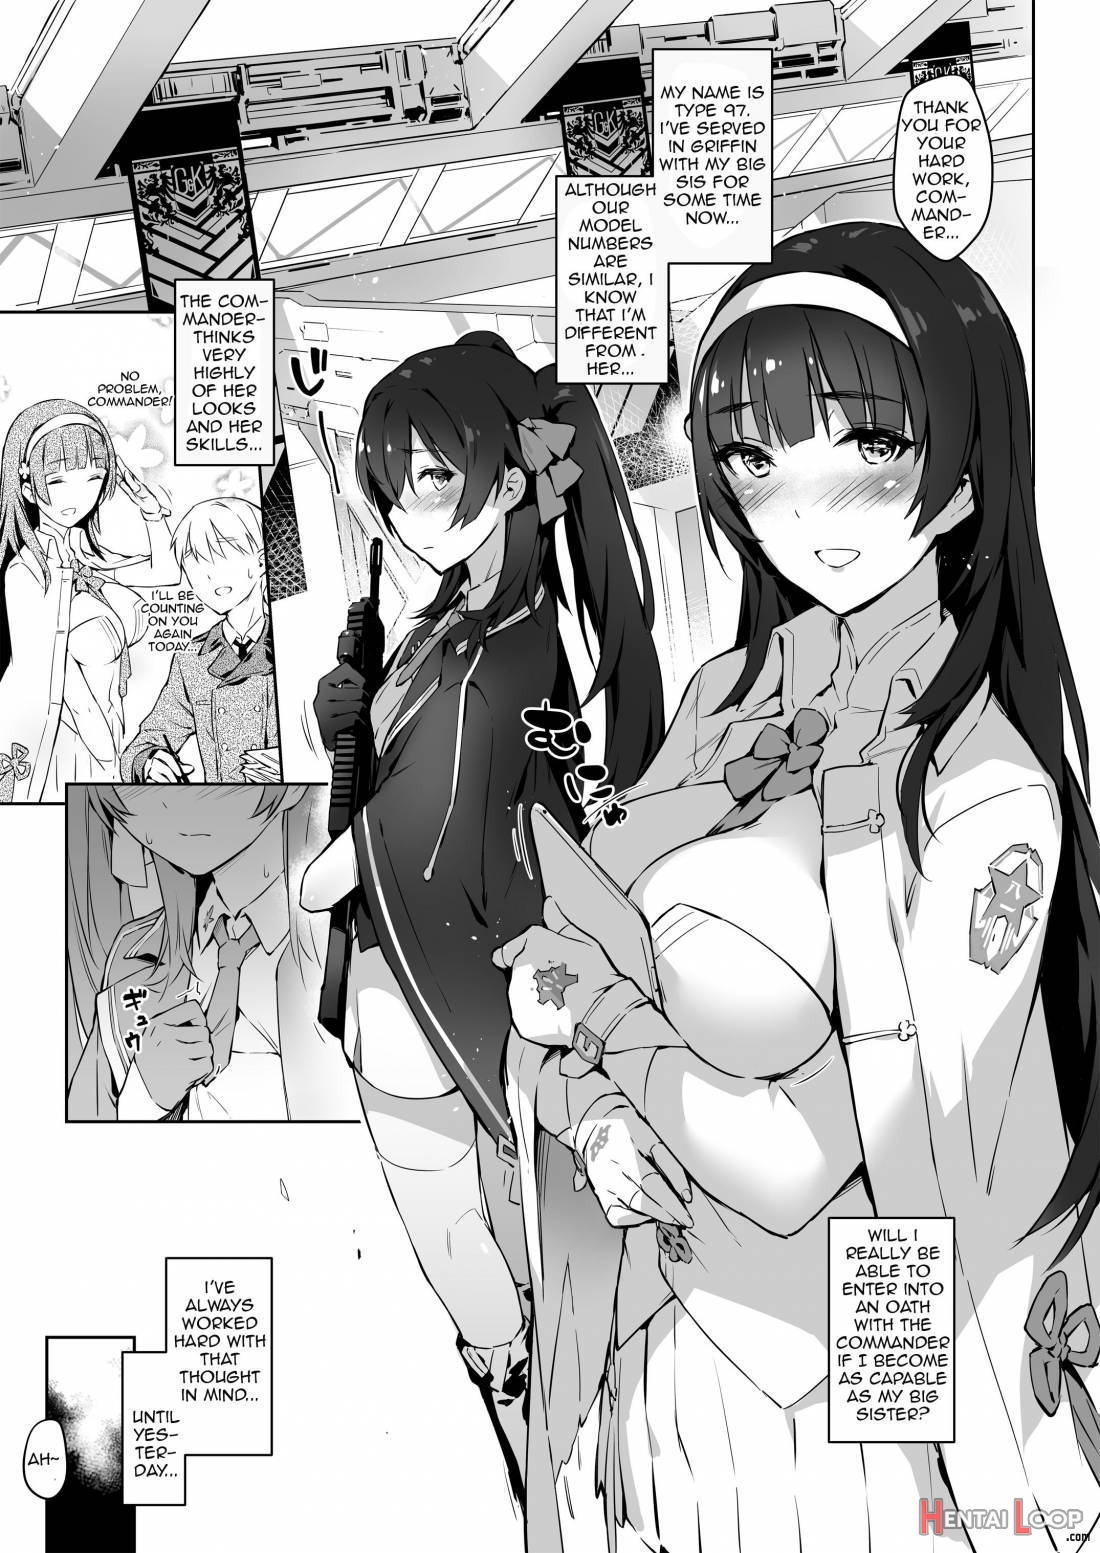 Type 95 Type 97, Let Your Big Sister Teach You! page 2